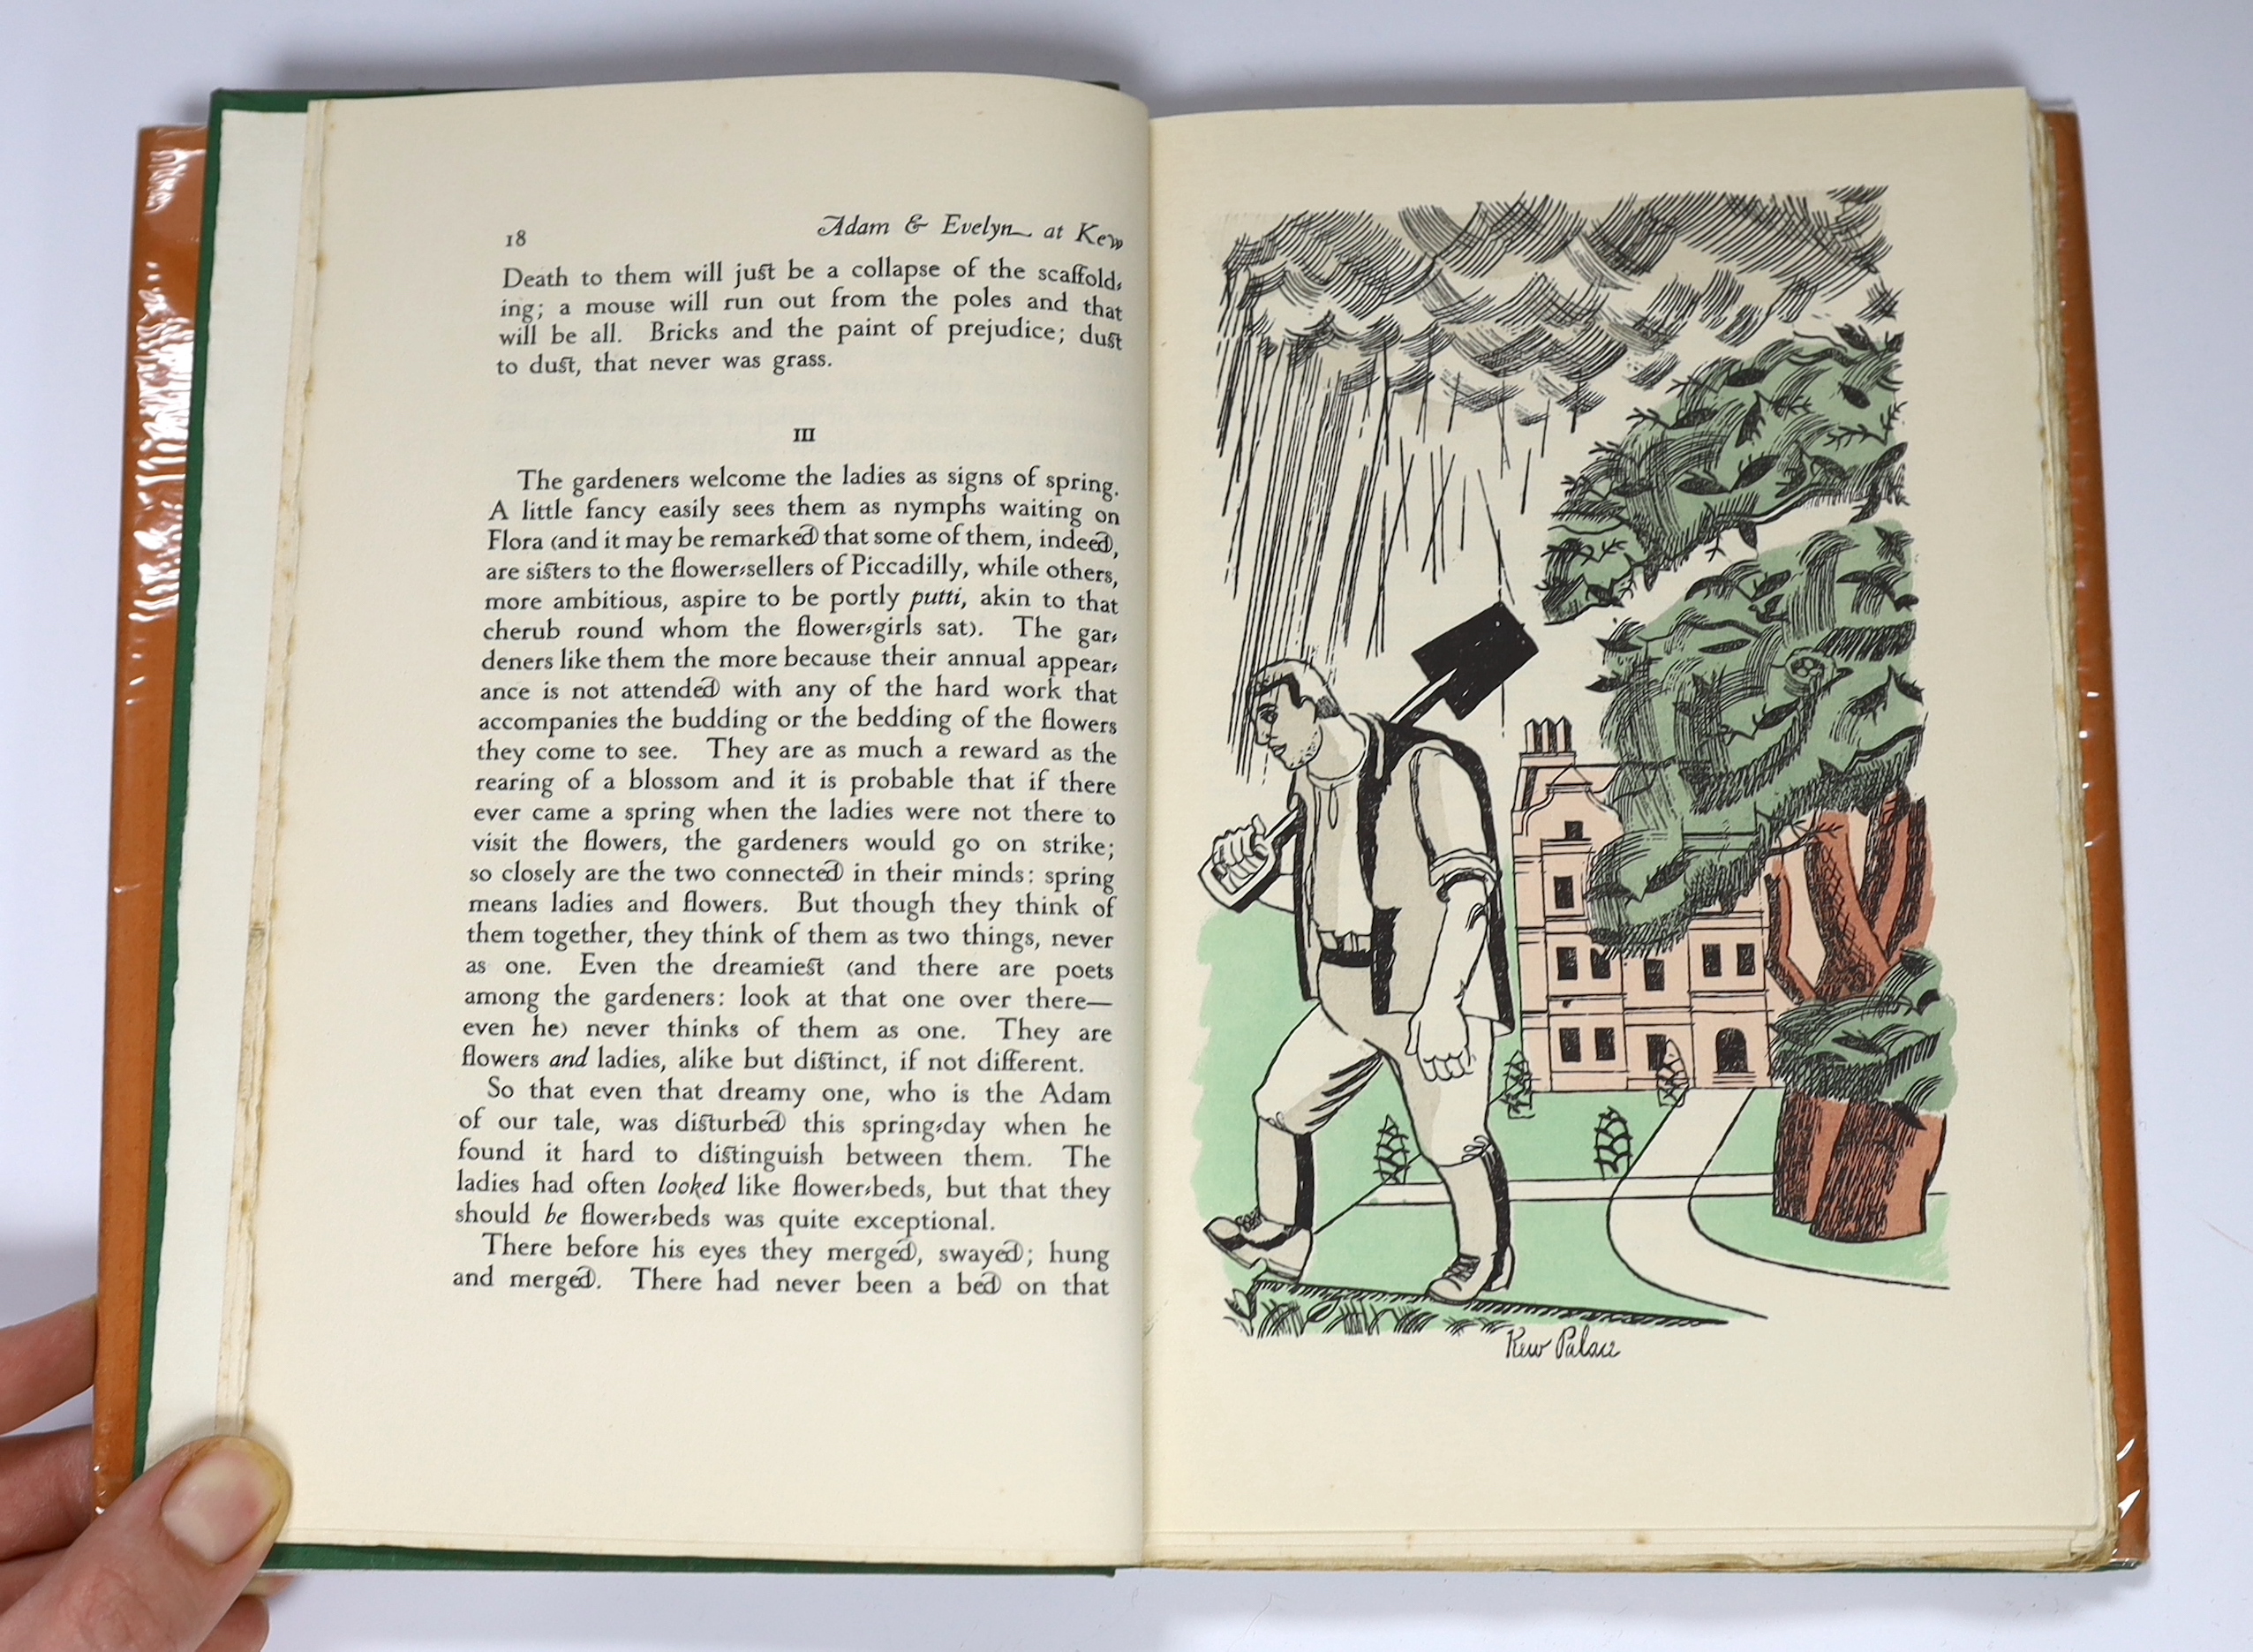 Herring, Robert - Adam and Evelyn at Kew, or, Revolt in the Gardens, one of 1000, illustrated by Edward Bawden, with 13 pochoir plates, 6 illustrations in the text and the endpapers decorated with aerial views of Kew Gar